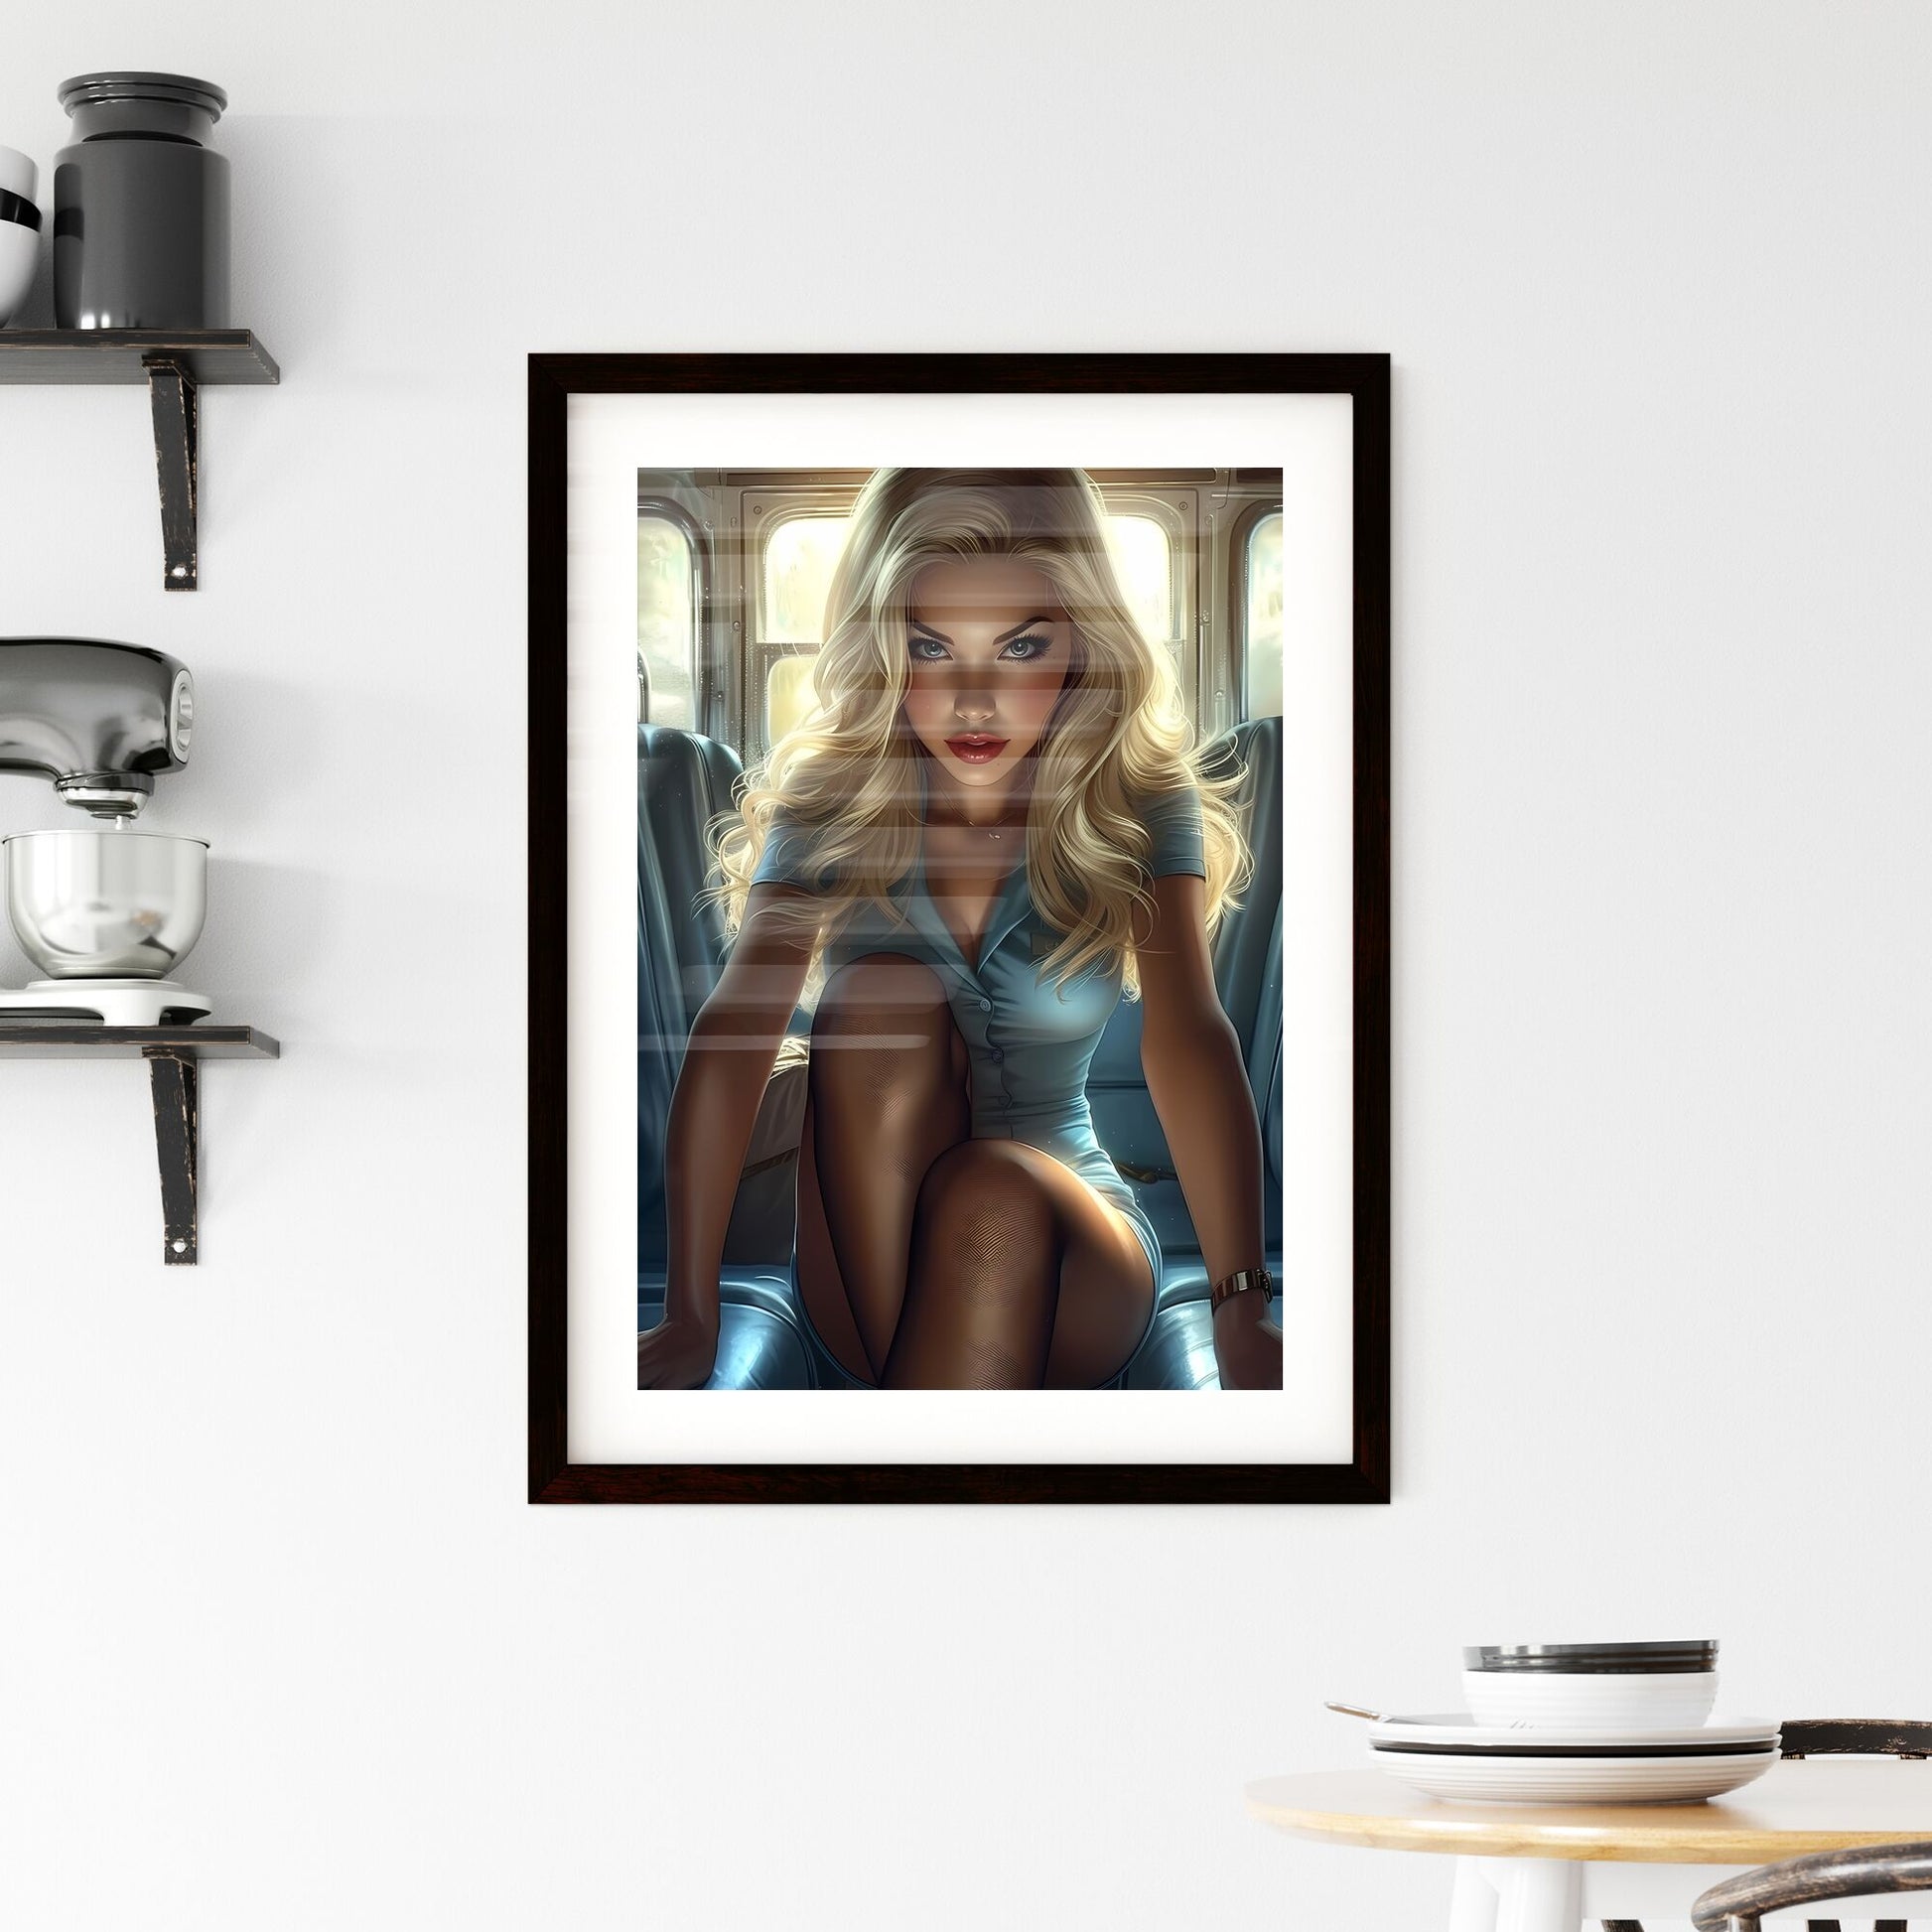 Pin up girl wearing stockings on a boat, in the style of realistic blue skies - Art print of a woman sitting in a bus Default Title